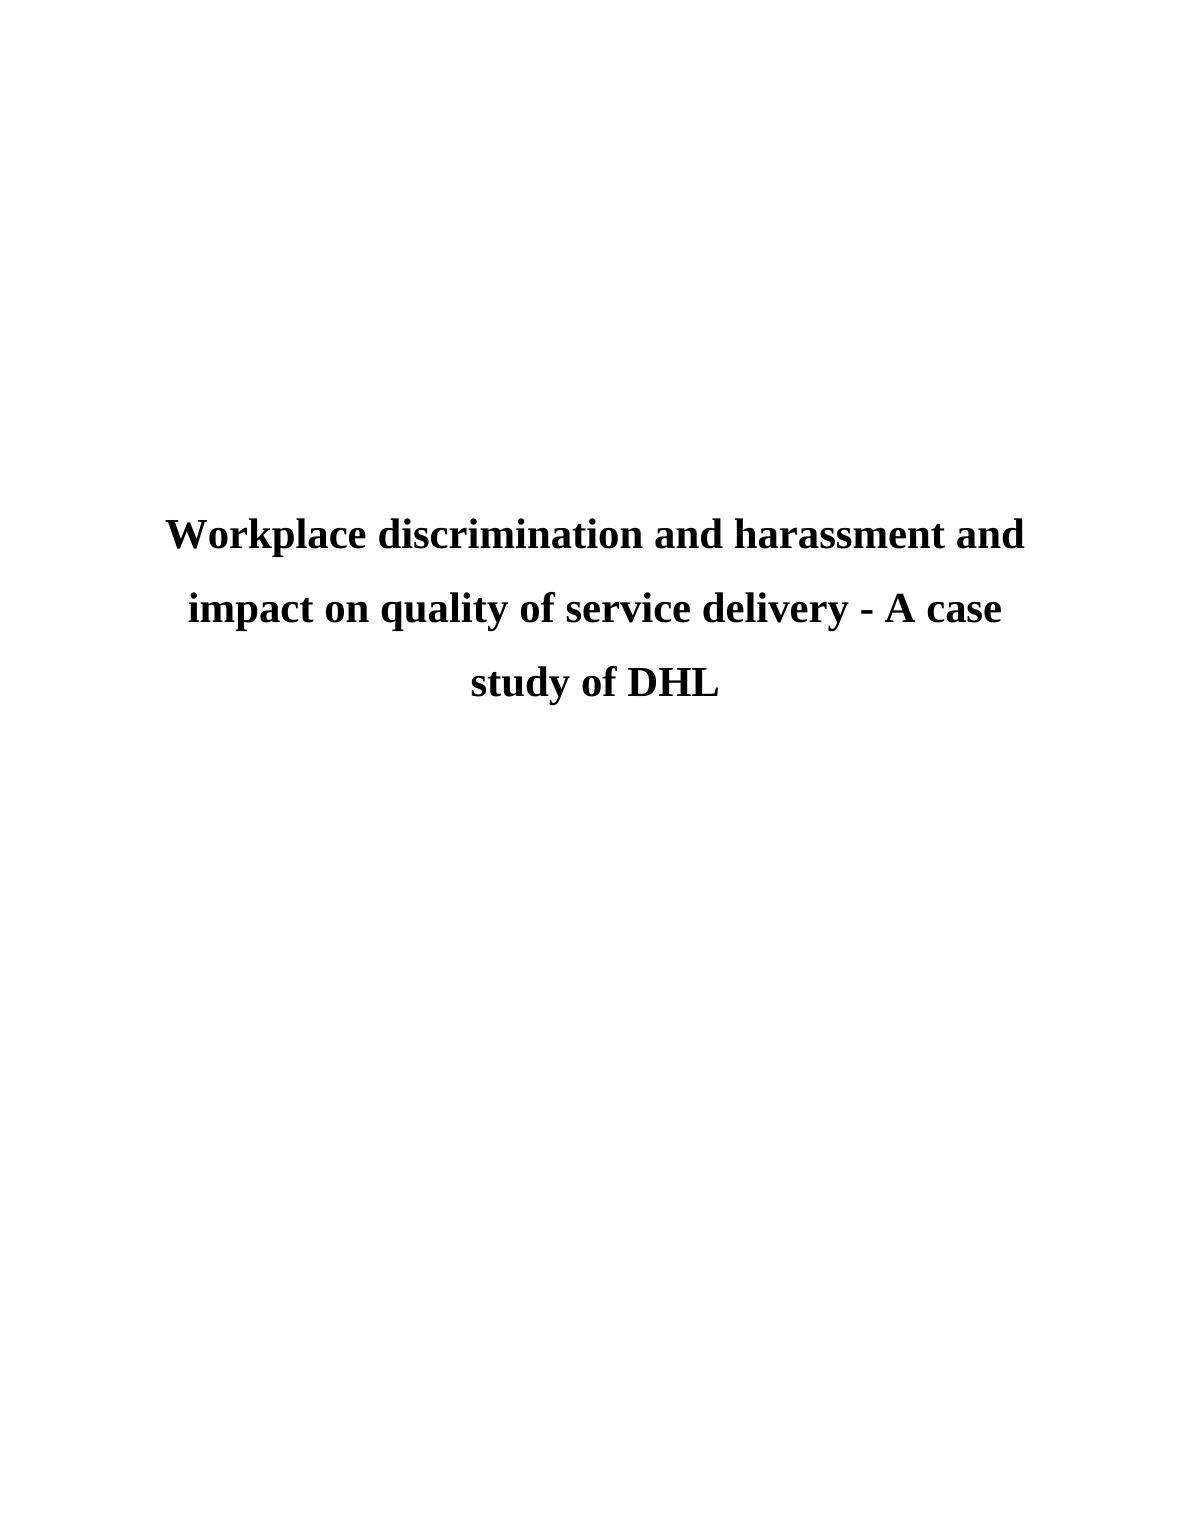 Workplace Discrimination and Harassment: Impact on Quality of Service Delivery - A Case Study of DHL_1